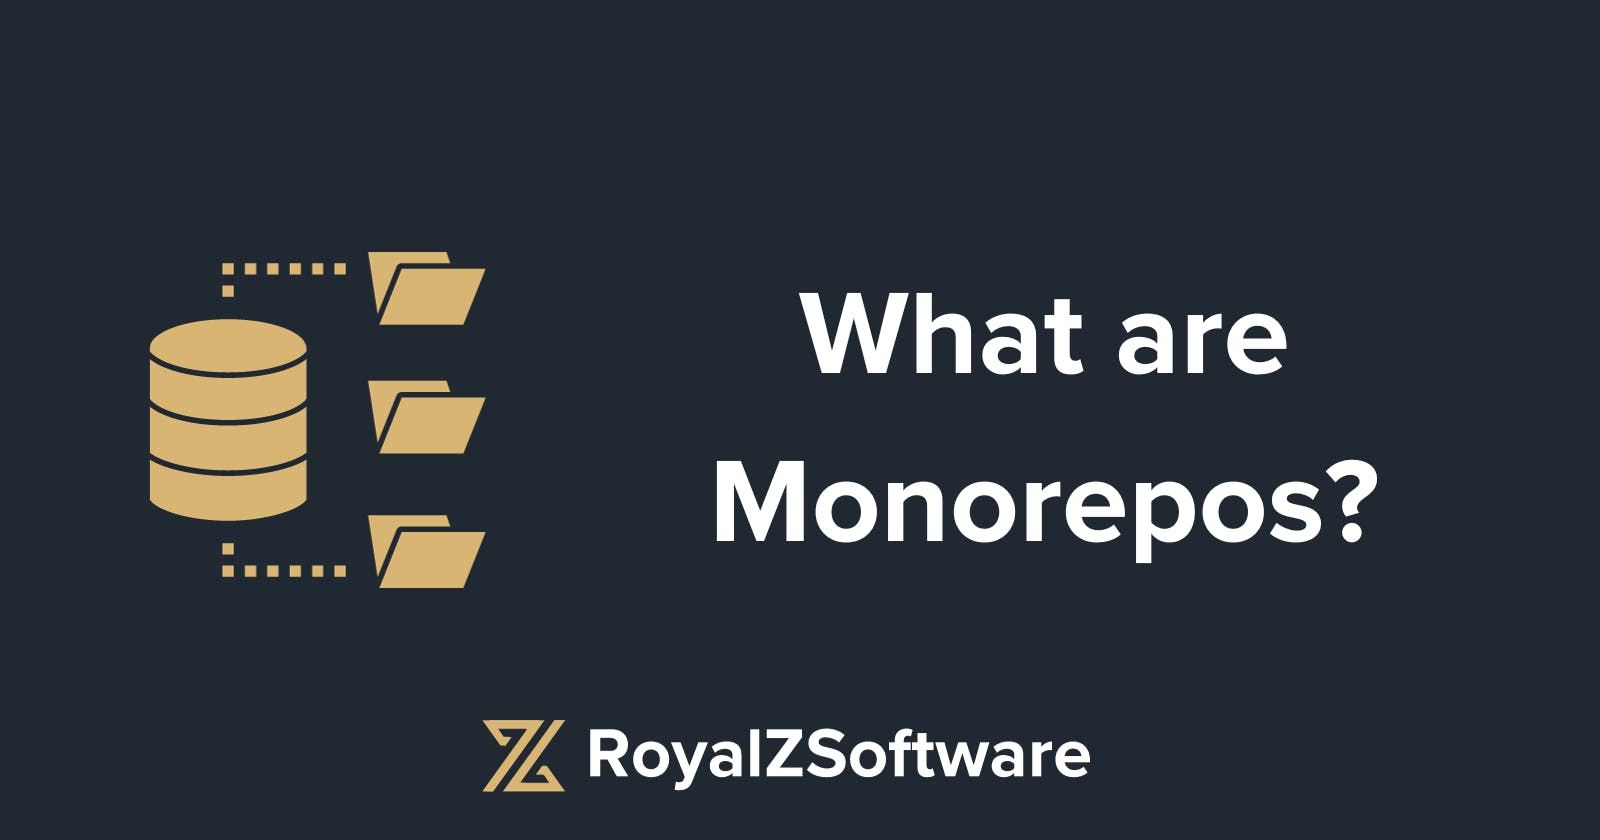 Monorepos (1/3) - What are Monorepos?